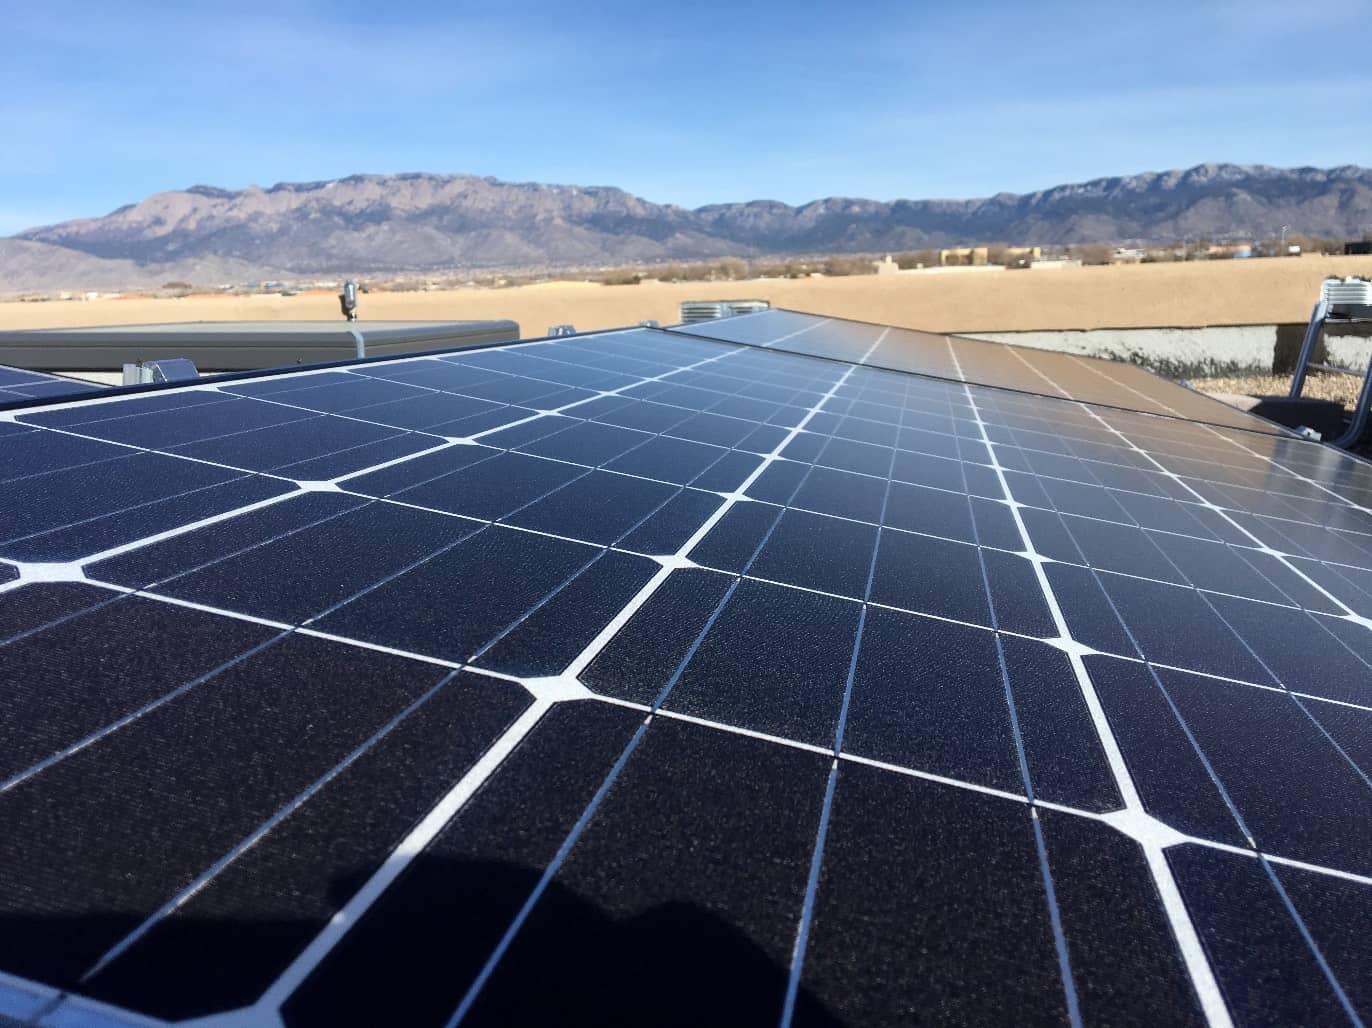 Recent Changes In The PRC Rules: How Will the PRC’s Decision Affect My Solar Project in New Mexico? (Part 2)